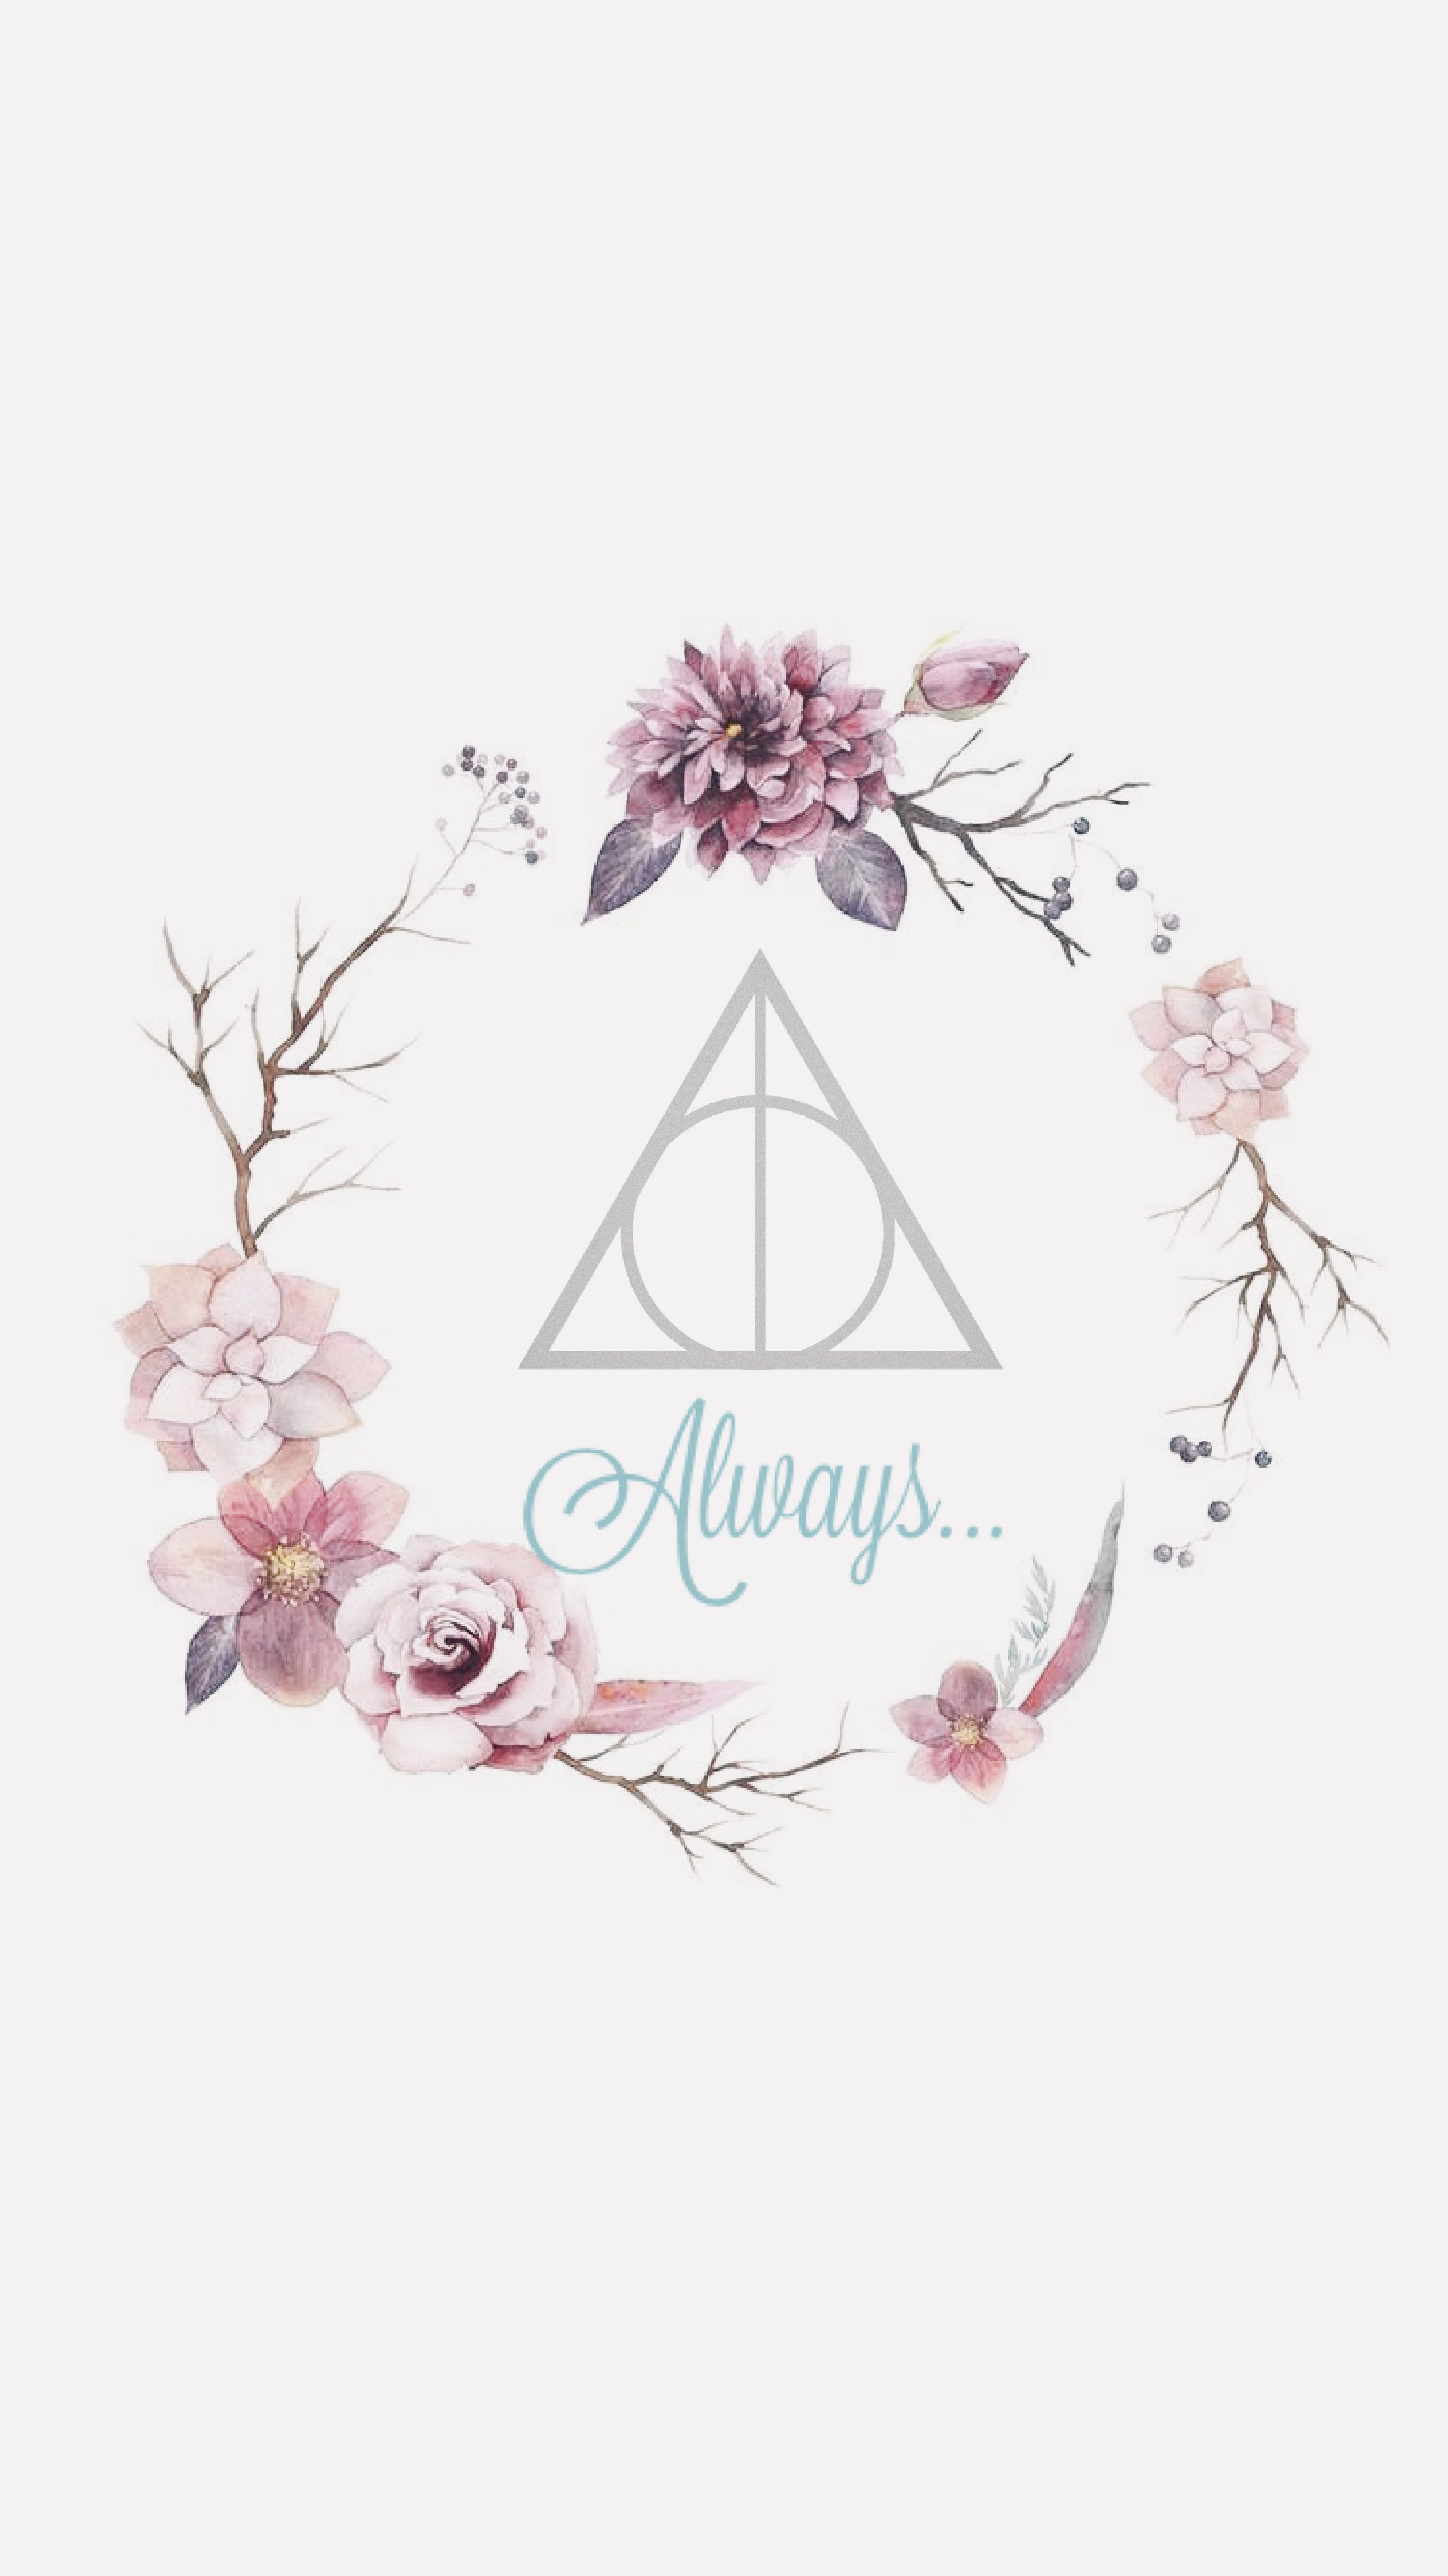 Wallpaper Harry Potter Always Pink girly cute flowers dealthy hallows. Harry potter background, Harry potter wallpaper phone, Harry potter phone